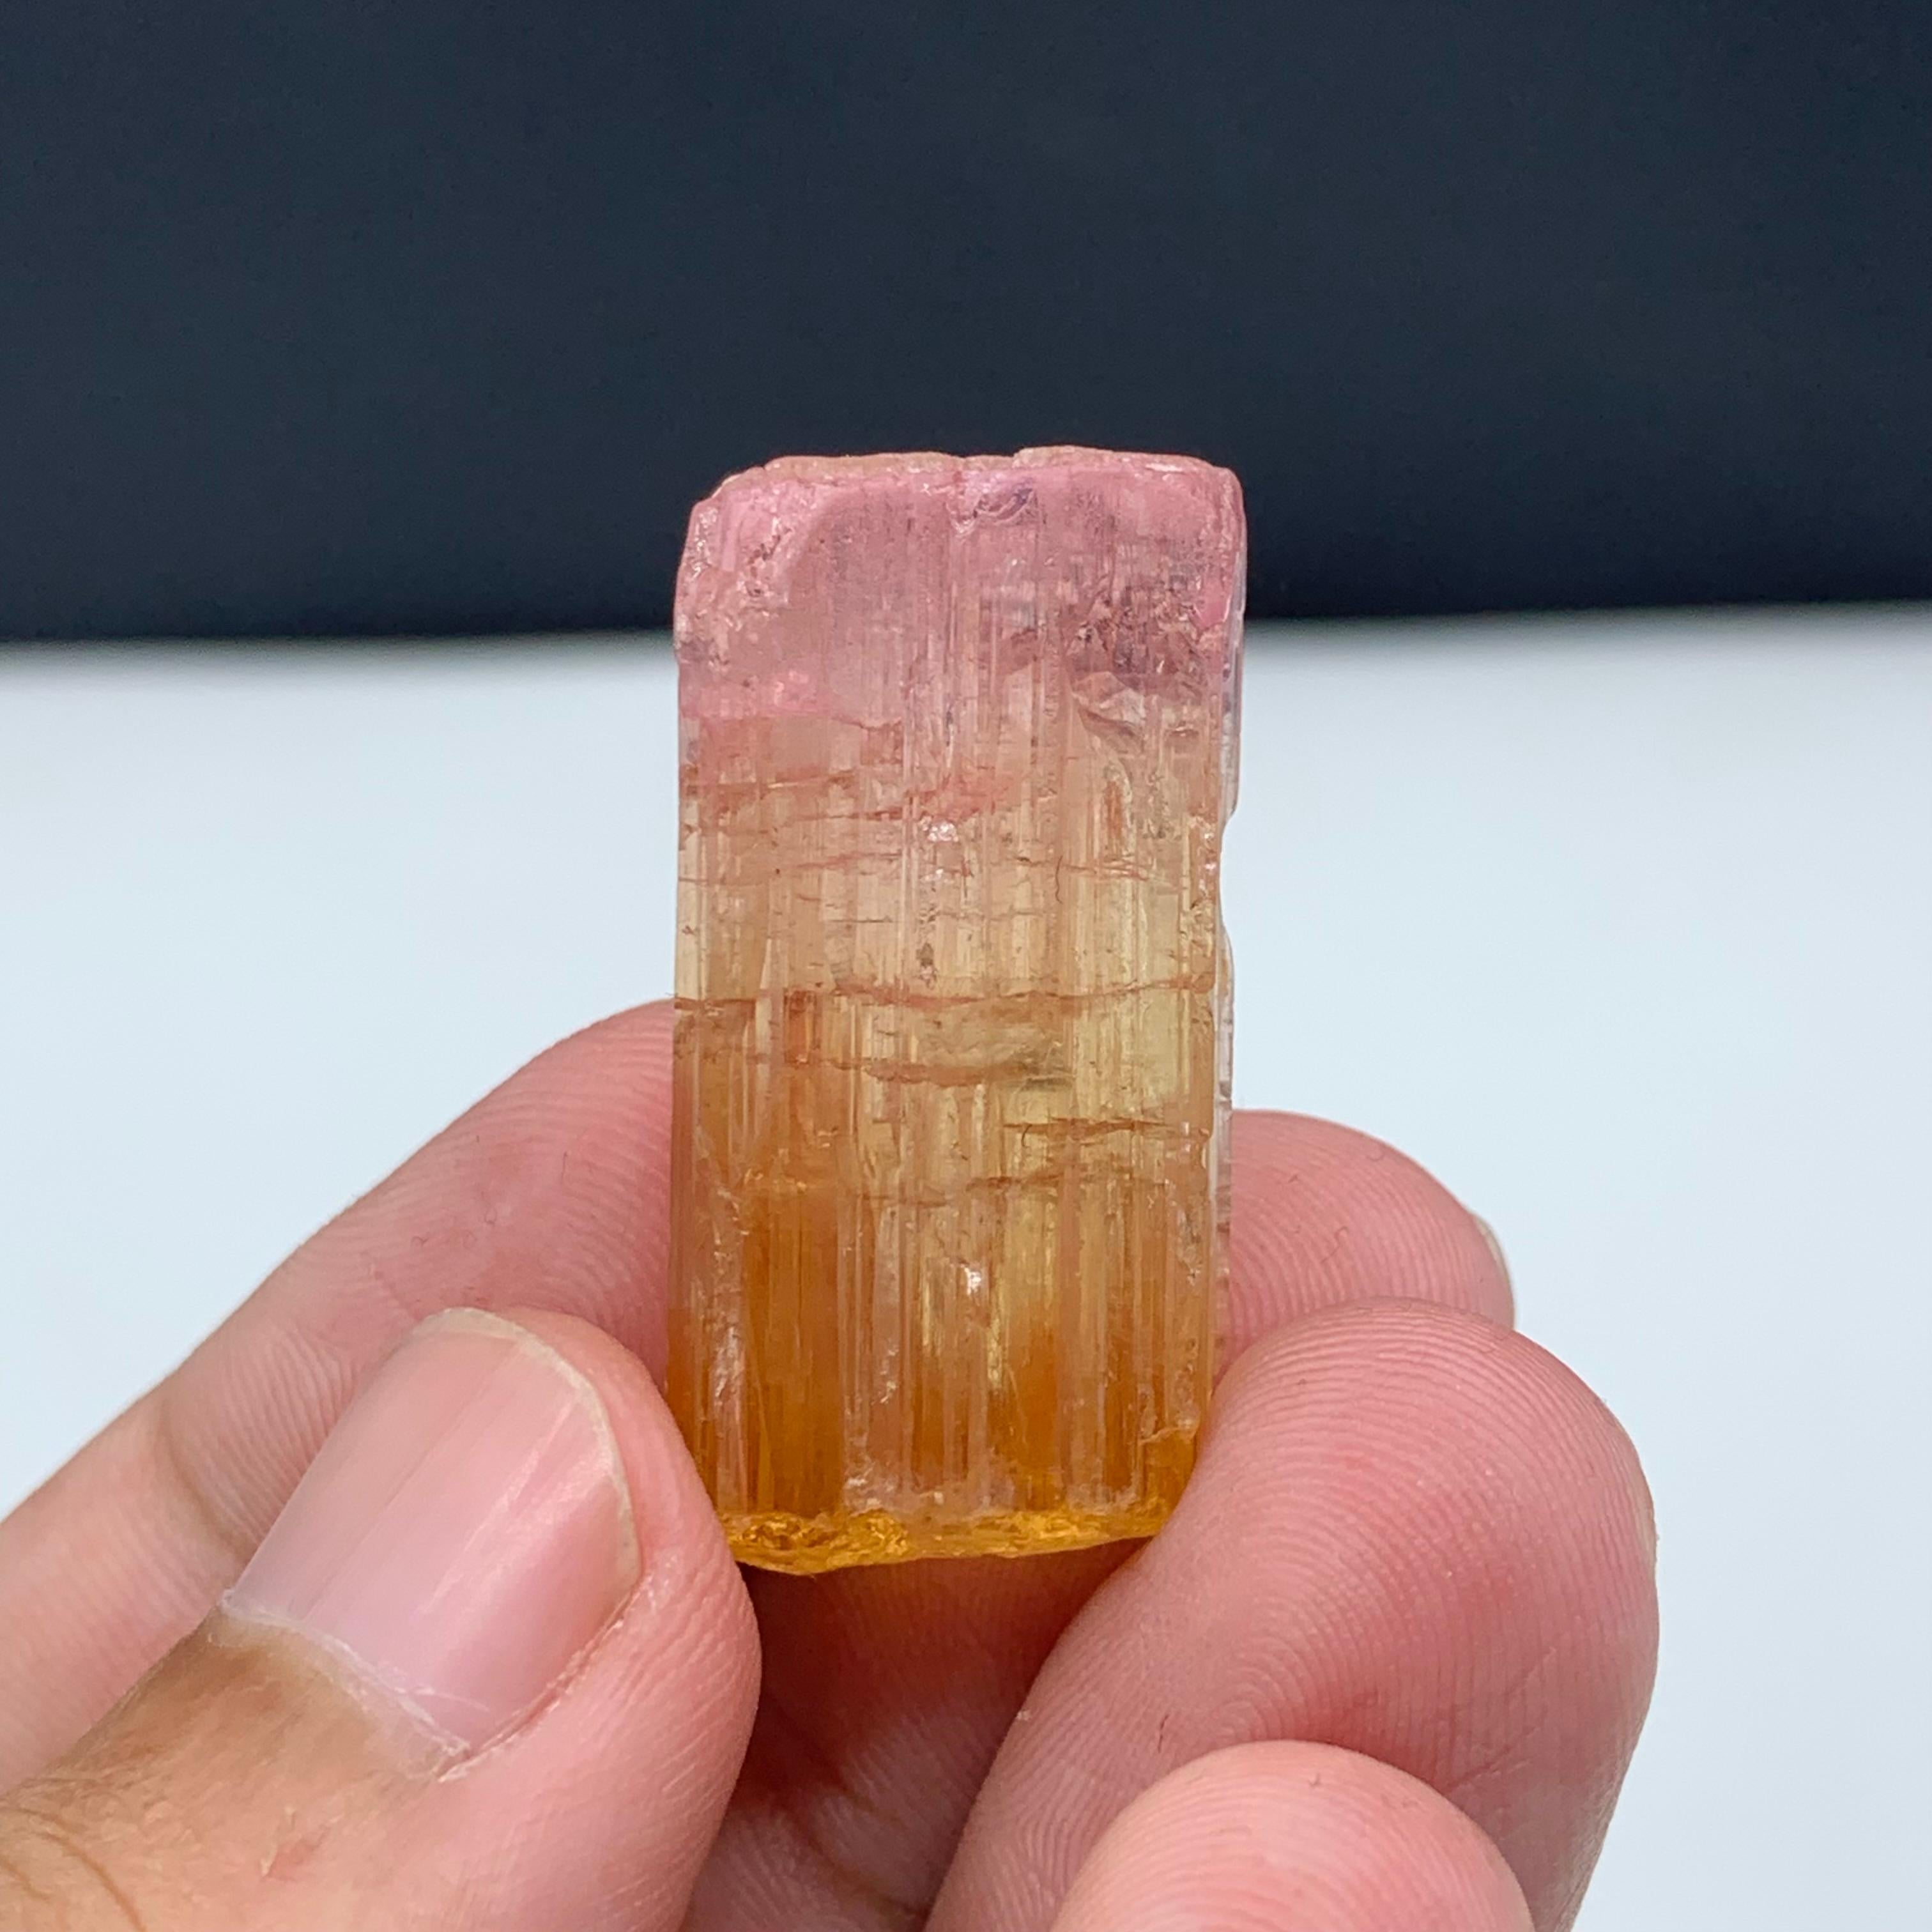 18th Century and Earlier 48 Carat Amazing Bi Color Tourmaline Crystal From Paprook Mine, Afghanistan For Sale